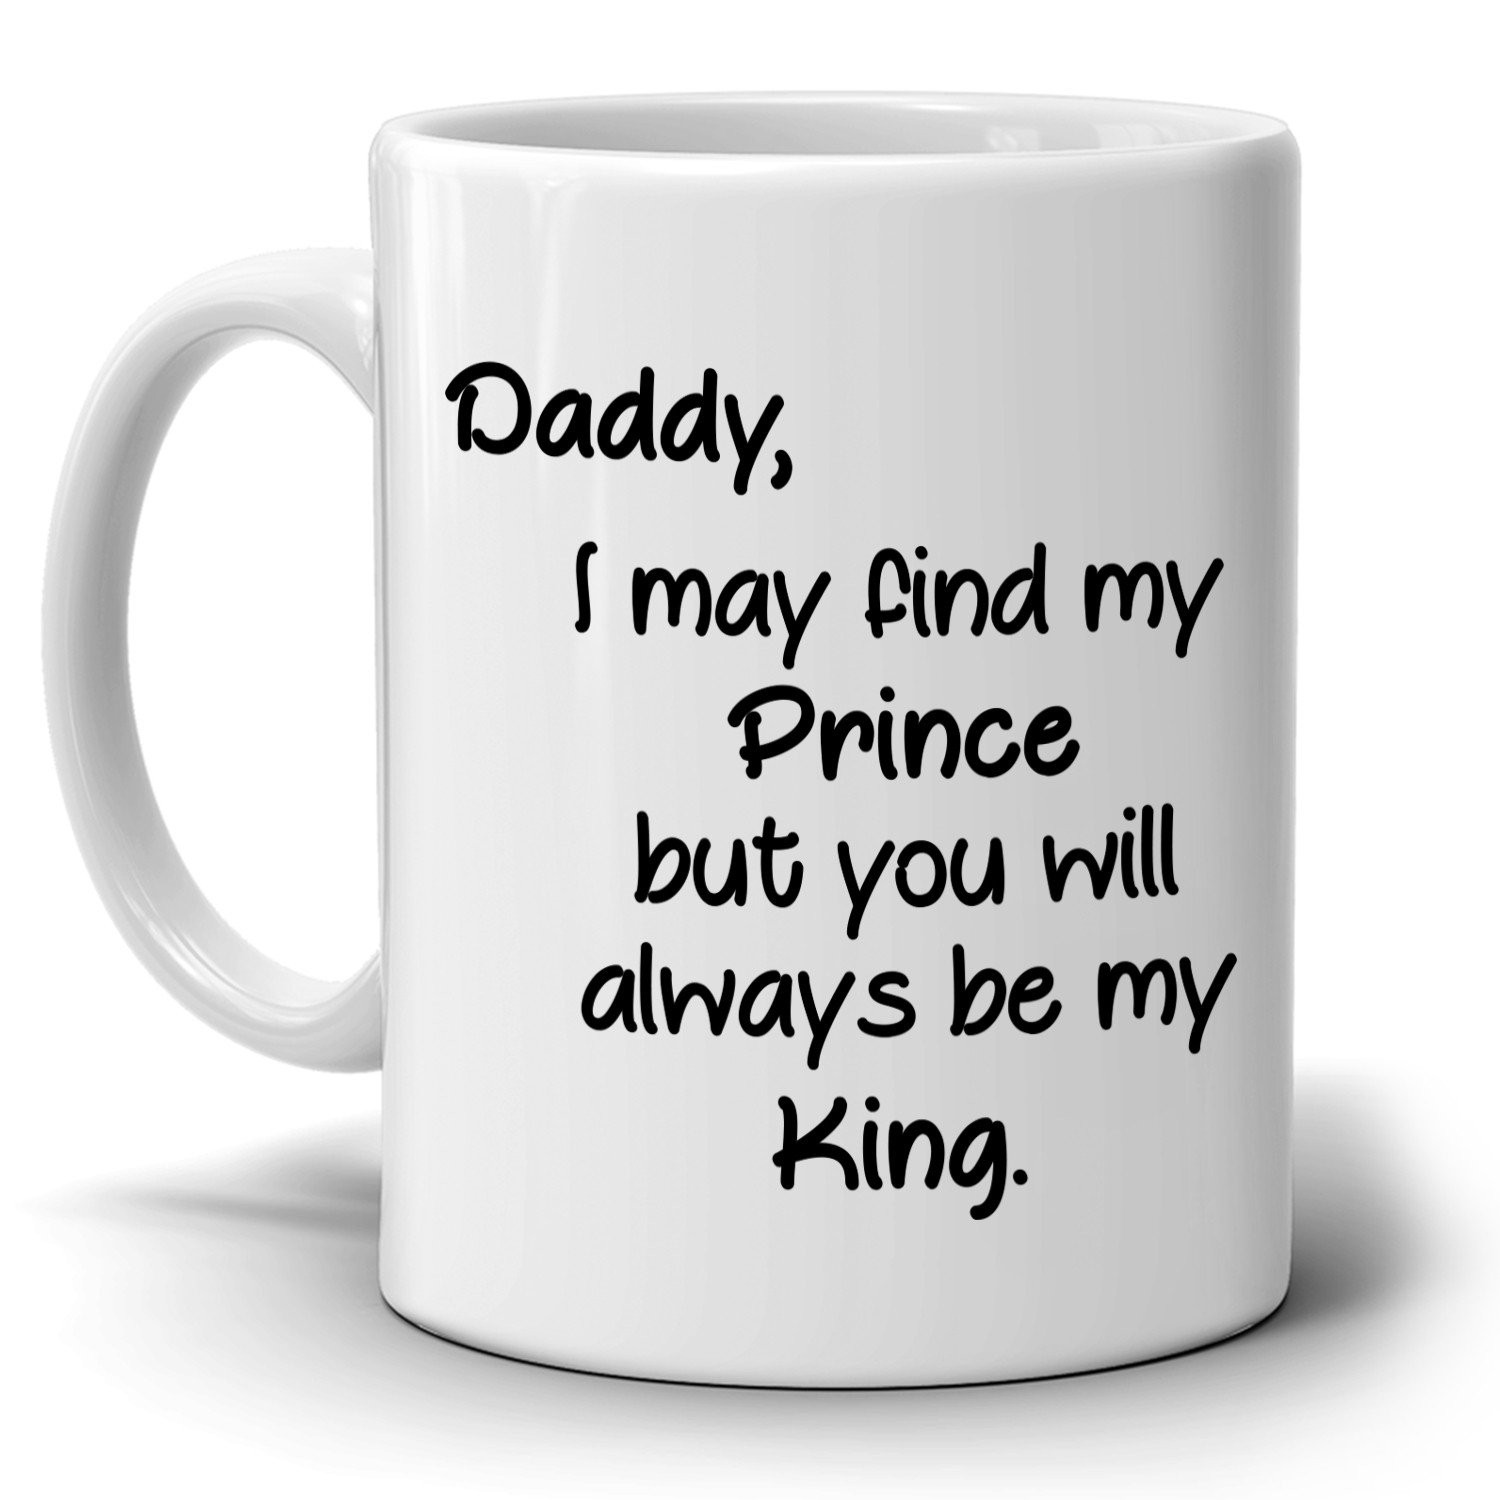 Dad Birthday Gift Ideas From Daughter
 Daddy Birthday Gifts From Daughter Fathers Day Gift for